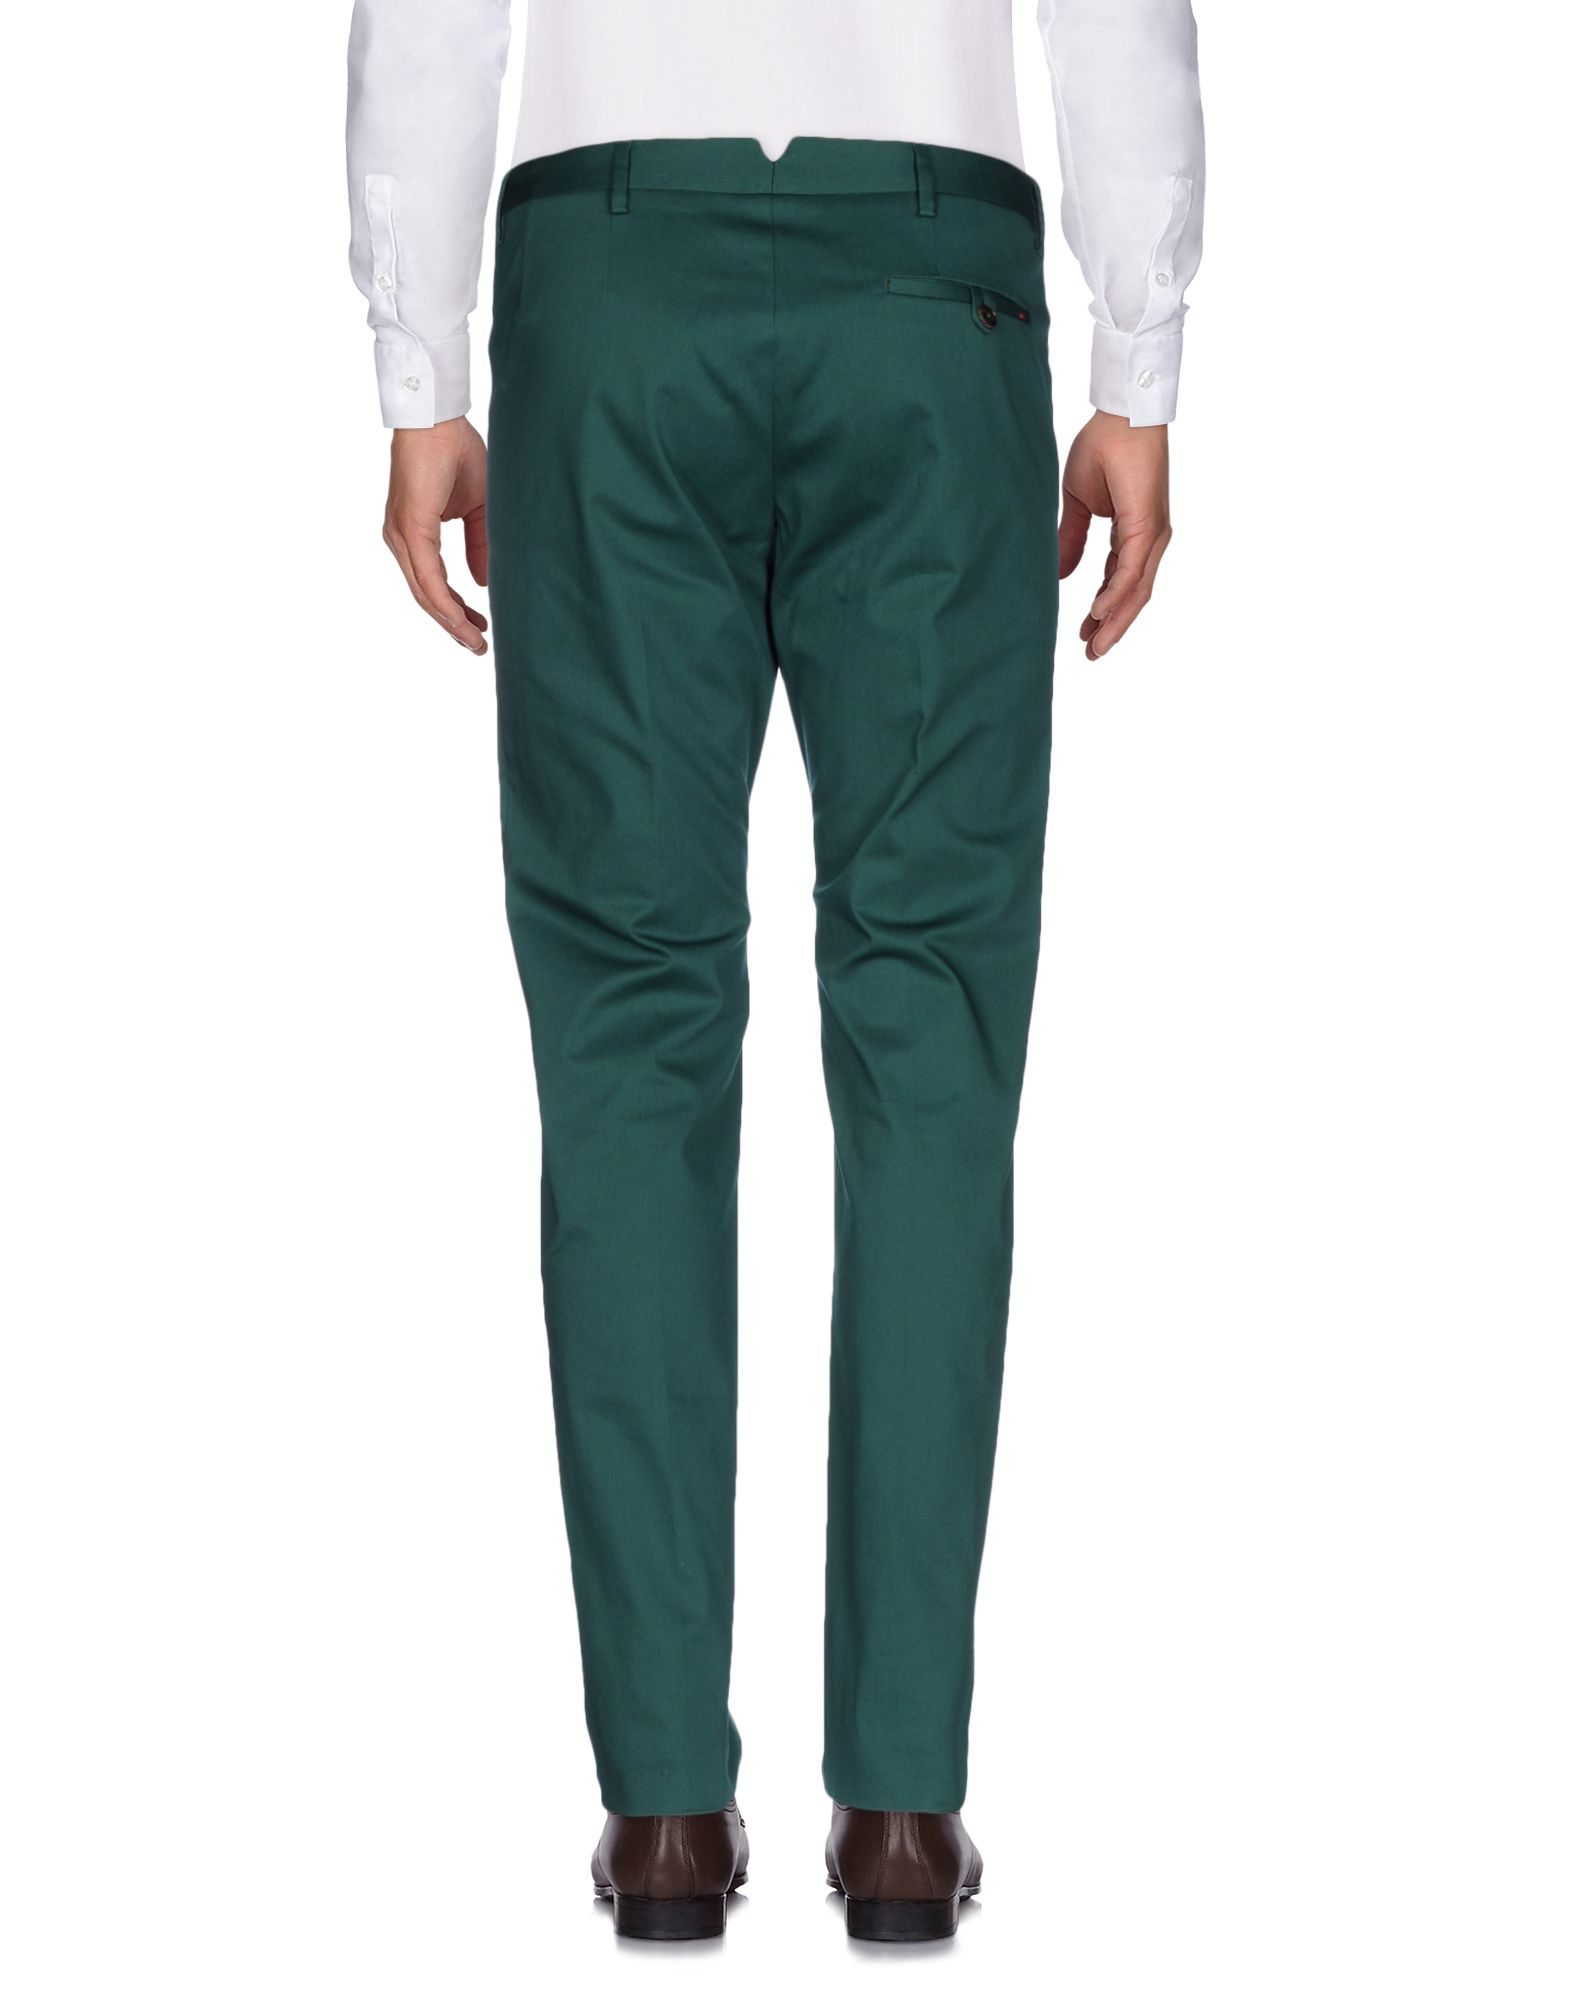 Gucci Casual Pants in Green for Men - Lyst